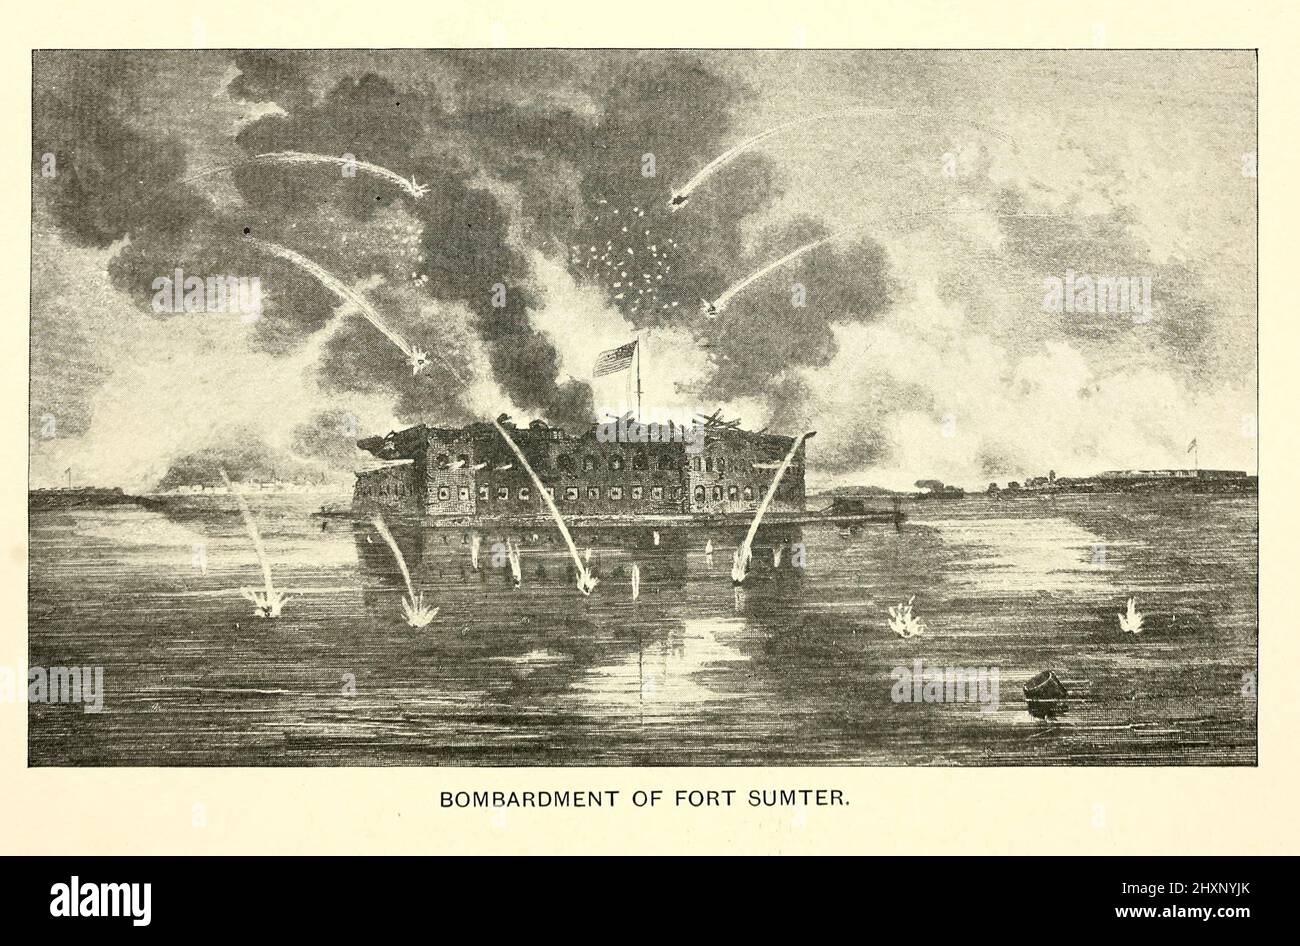 Bombardment of Fort Sumter 1861. Fort Sumter is a sea fort built on an artificial island protecting Charleston, South Carolina from naval invasion. Its origin dates to the War of 1812 when the British invaded Washington by sea. It was still incomplete in 1861 when the Battle of Fort Sumter began the American Civil War. It was severely damaged during the war, left in ruins, and although there was some rebuilding, the fort as conceived was never completed. from the book ' Angels of the battlefield : a history of the labors of the Catholic sisterhoods in the late civil war ' by George Barton, Pub Stock Photo